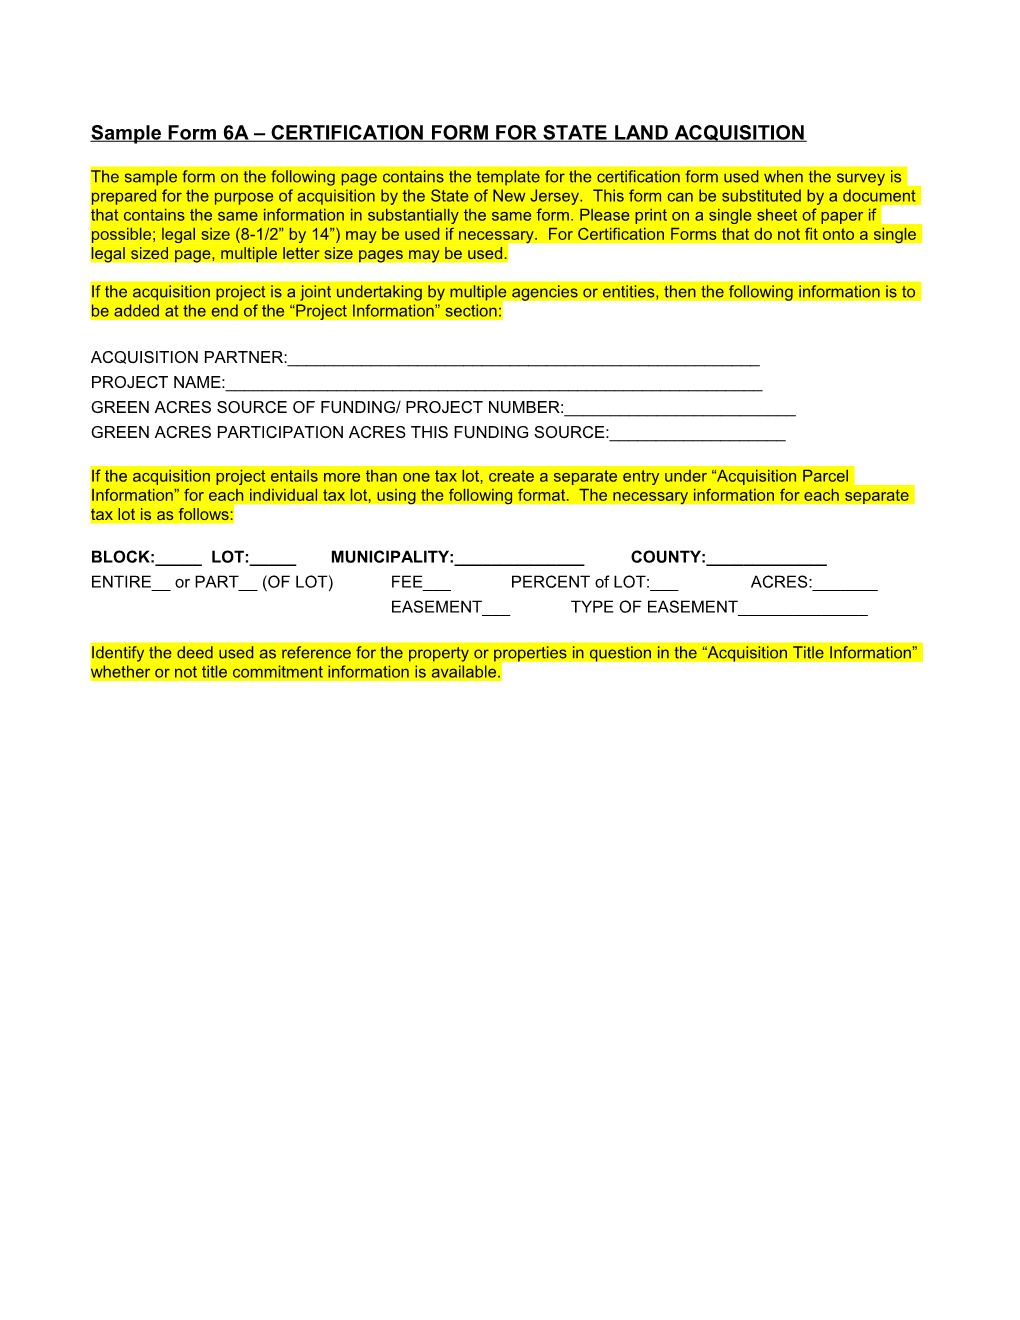 Sample Form 6A CERTIFICATION FORM for STATE LAND ACQUISITION